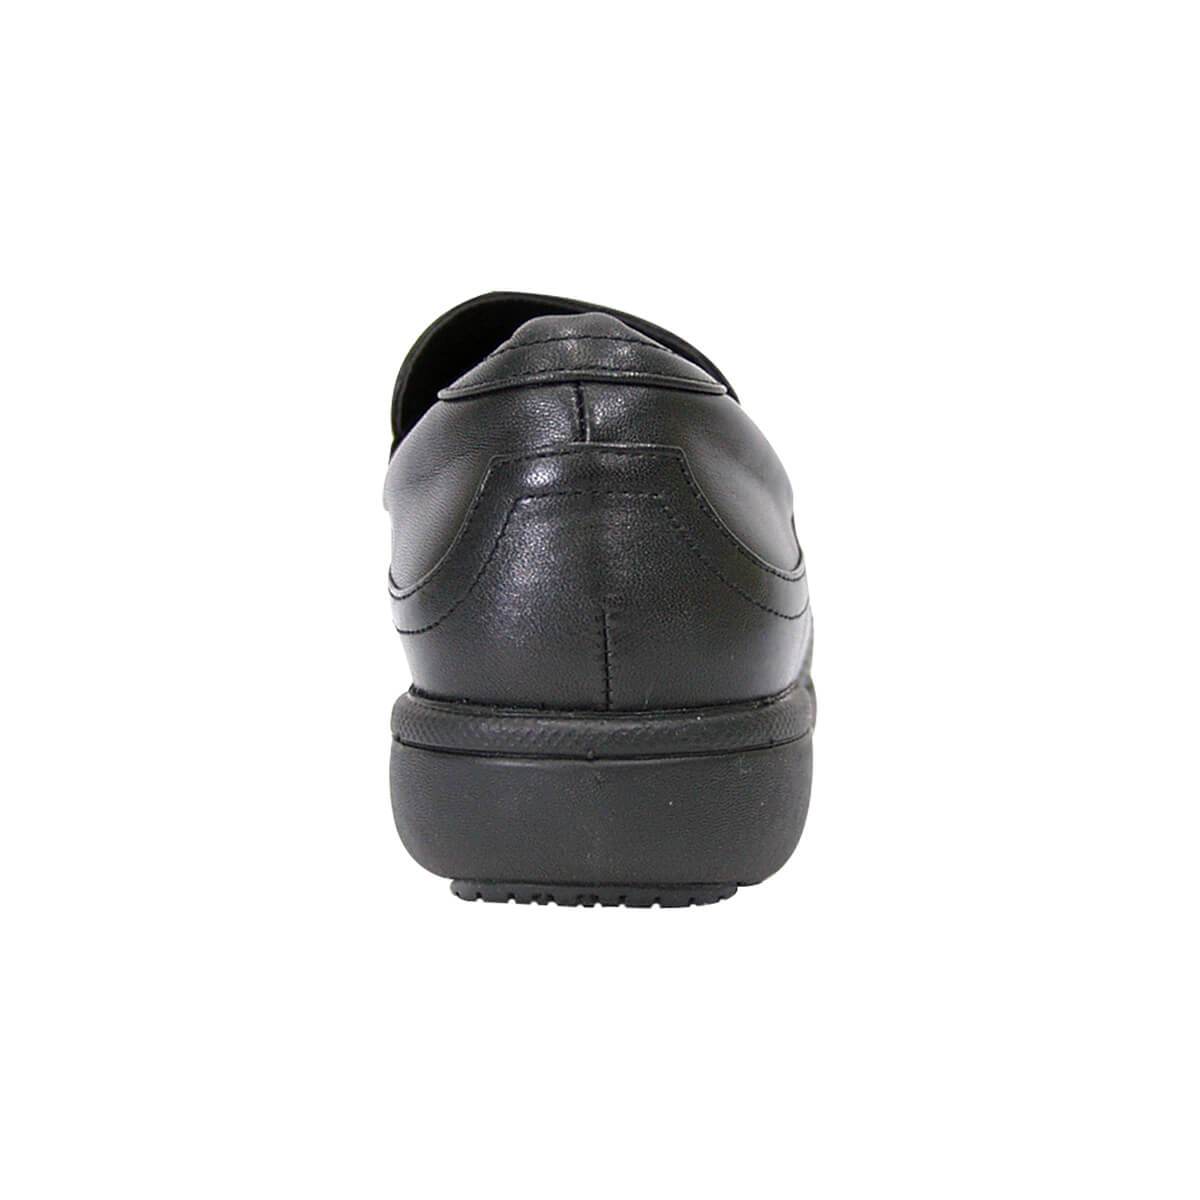 PEERAGE Therese Women's Wide Width Leather Loafers